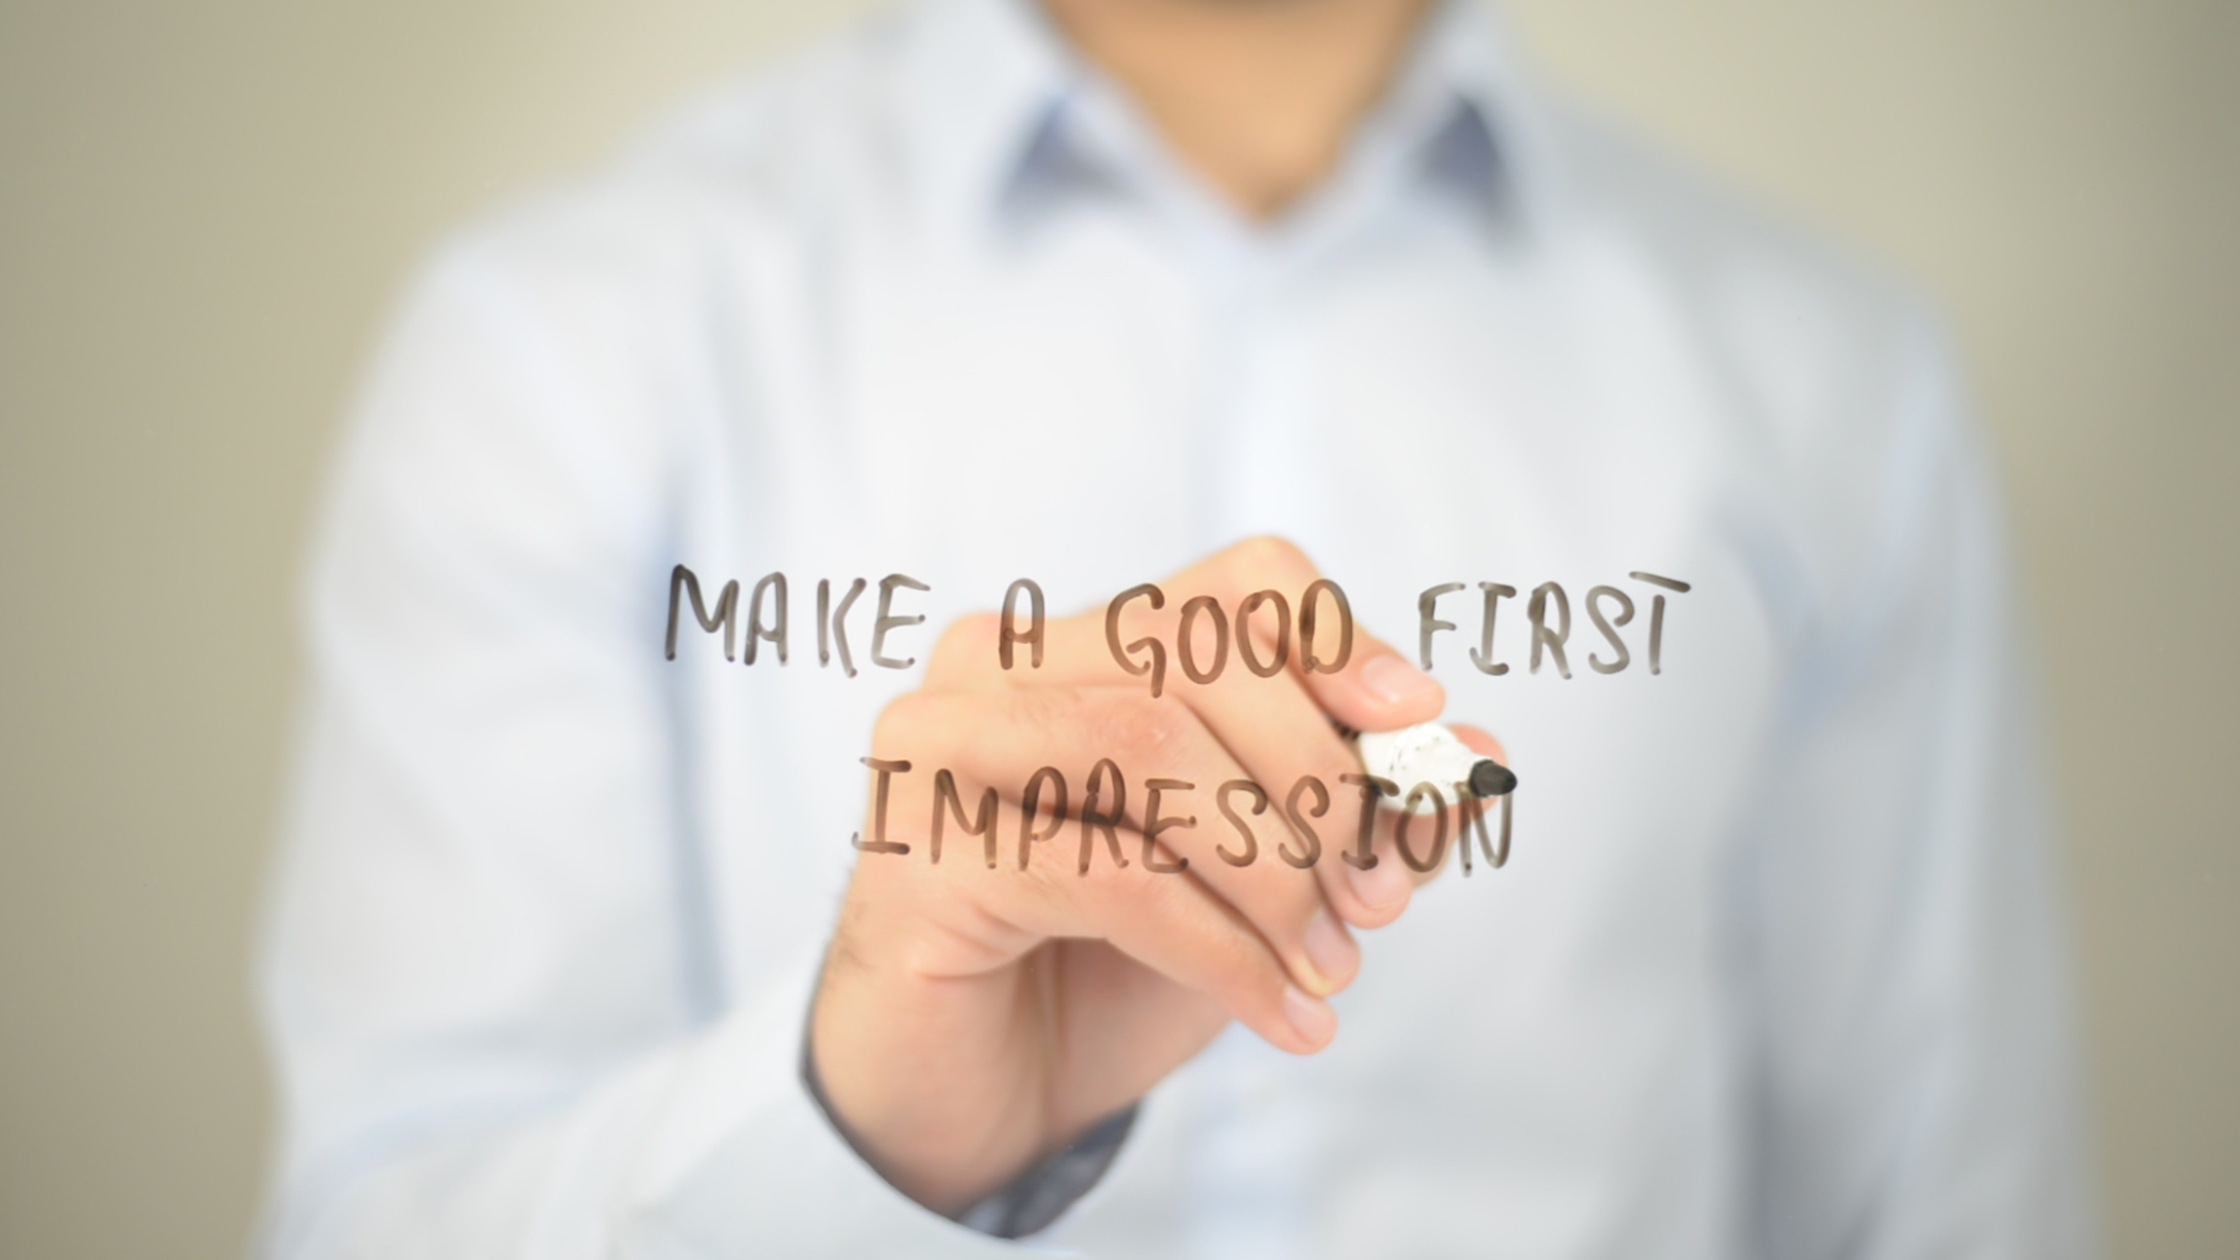 Resume writing tips for making a strong first impression